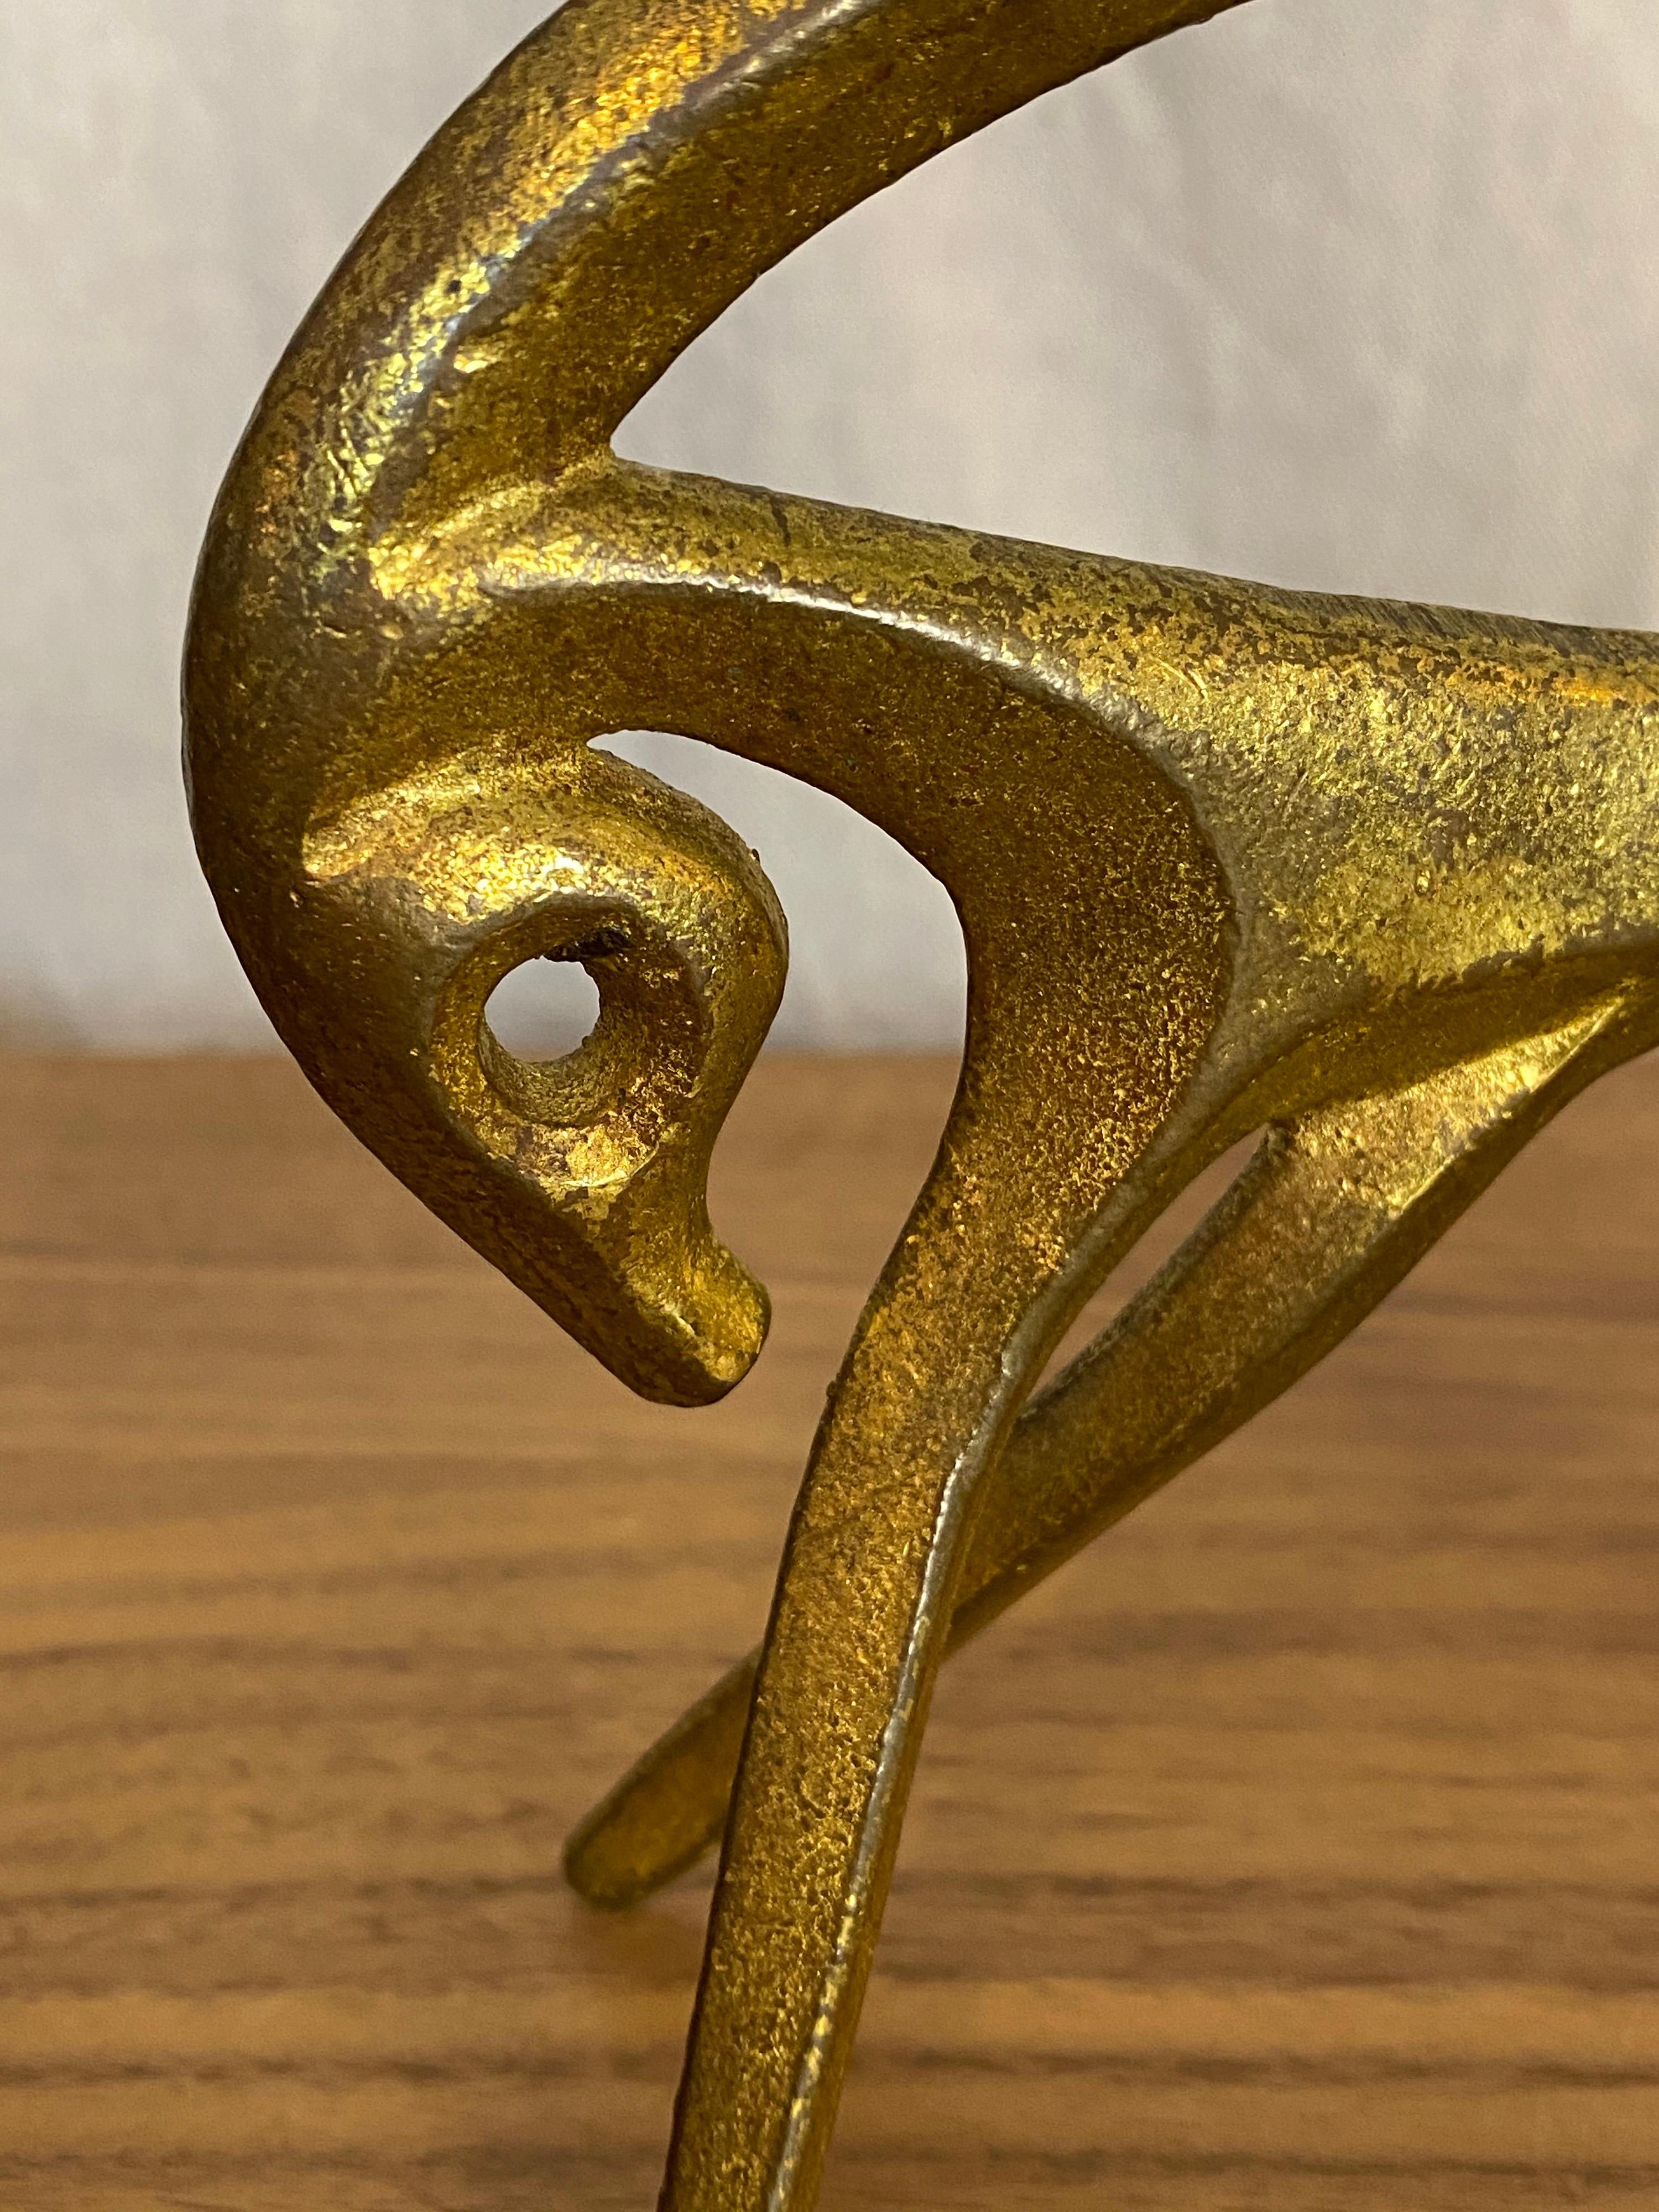 Frederic Weinberg antelope, iron animal with a brass or bronze applied surface treatment. Weinberg did an entire series of these whimsical animals. Great to collect the whole herd! Signed lower foot.